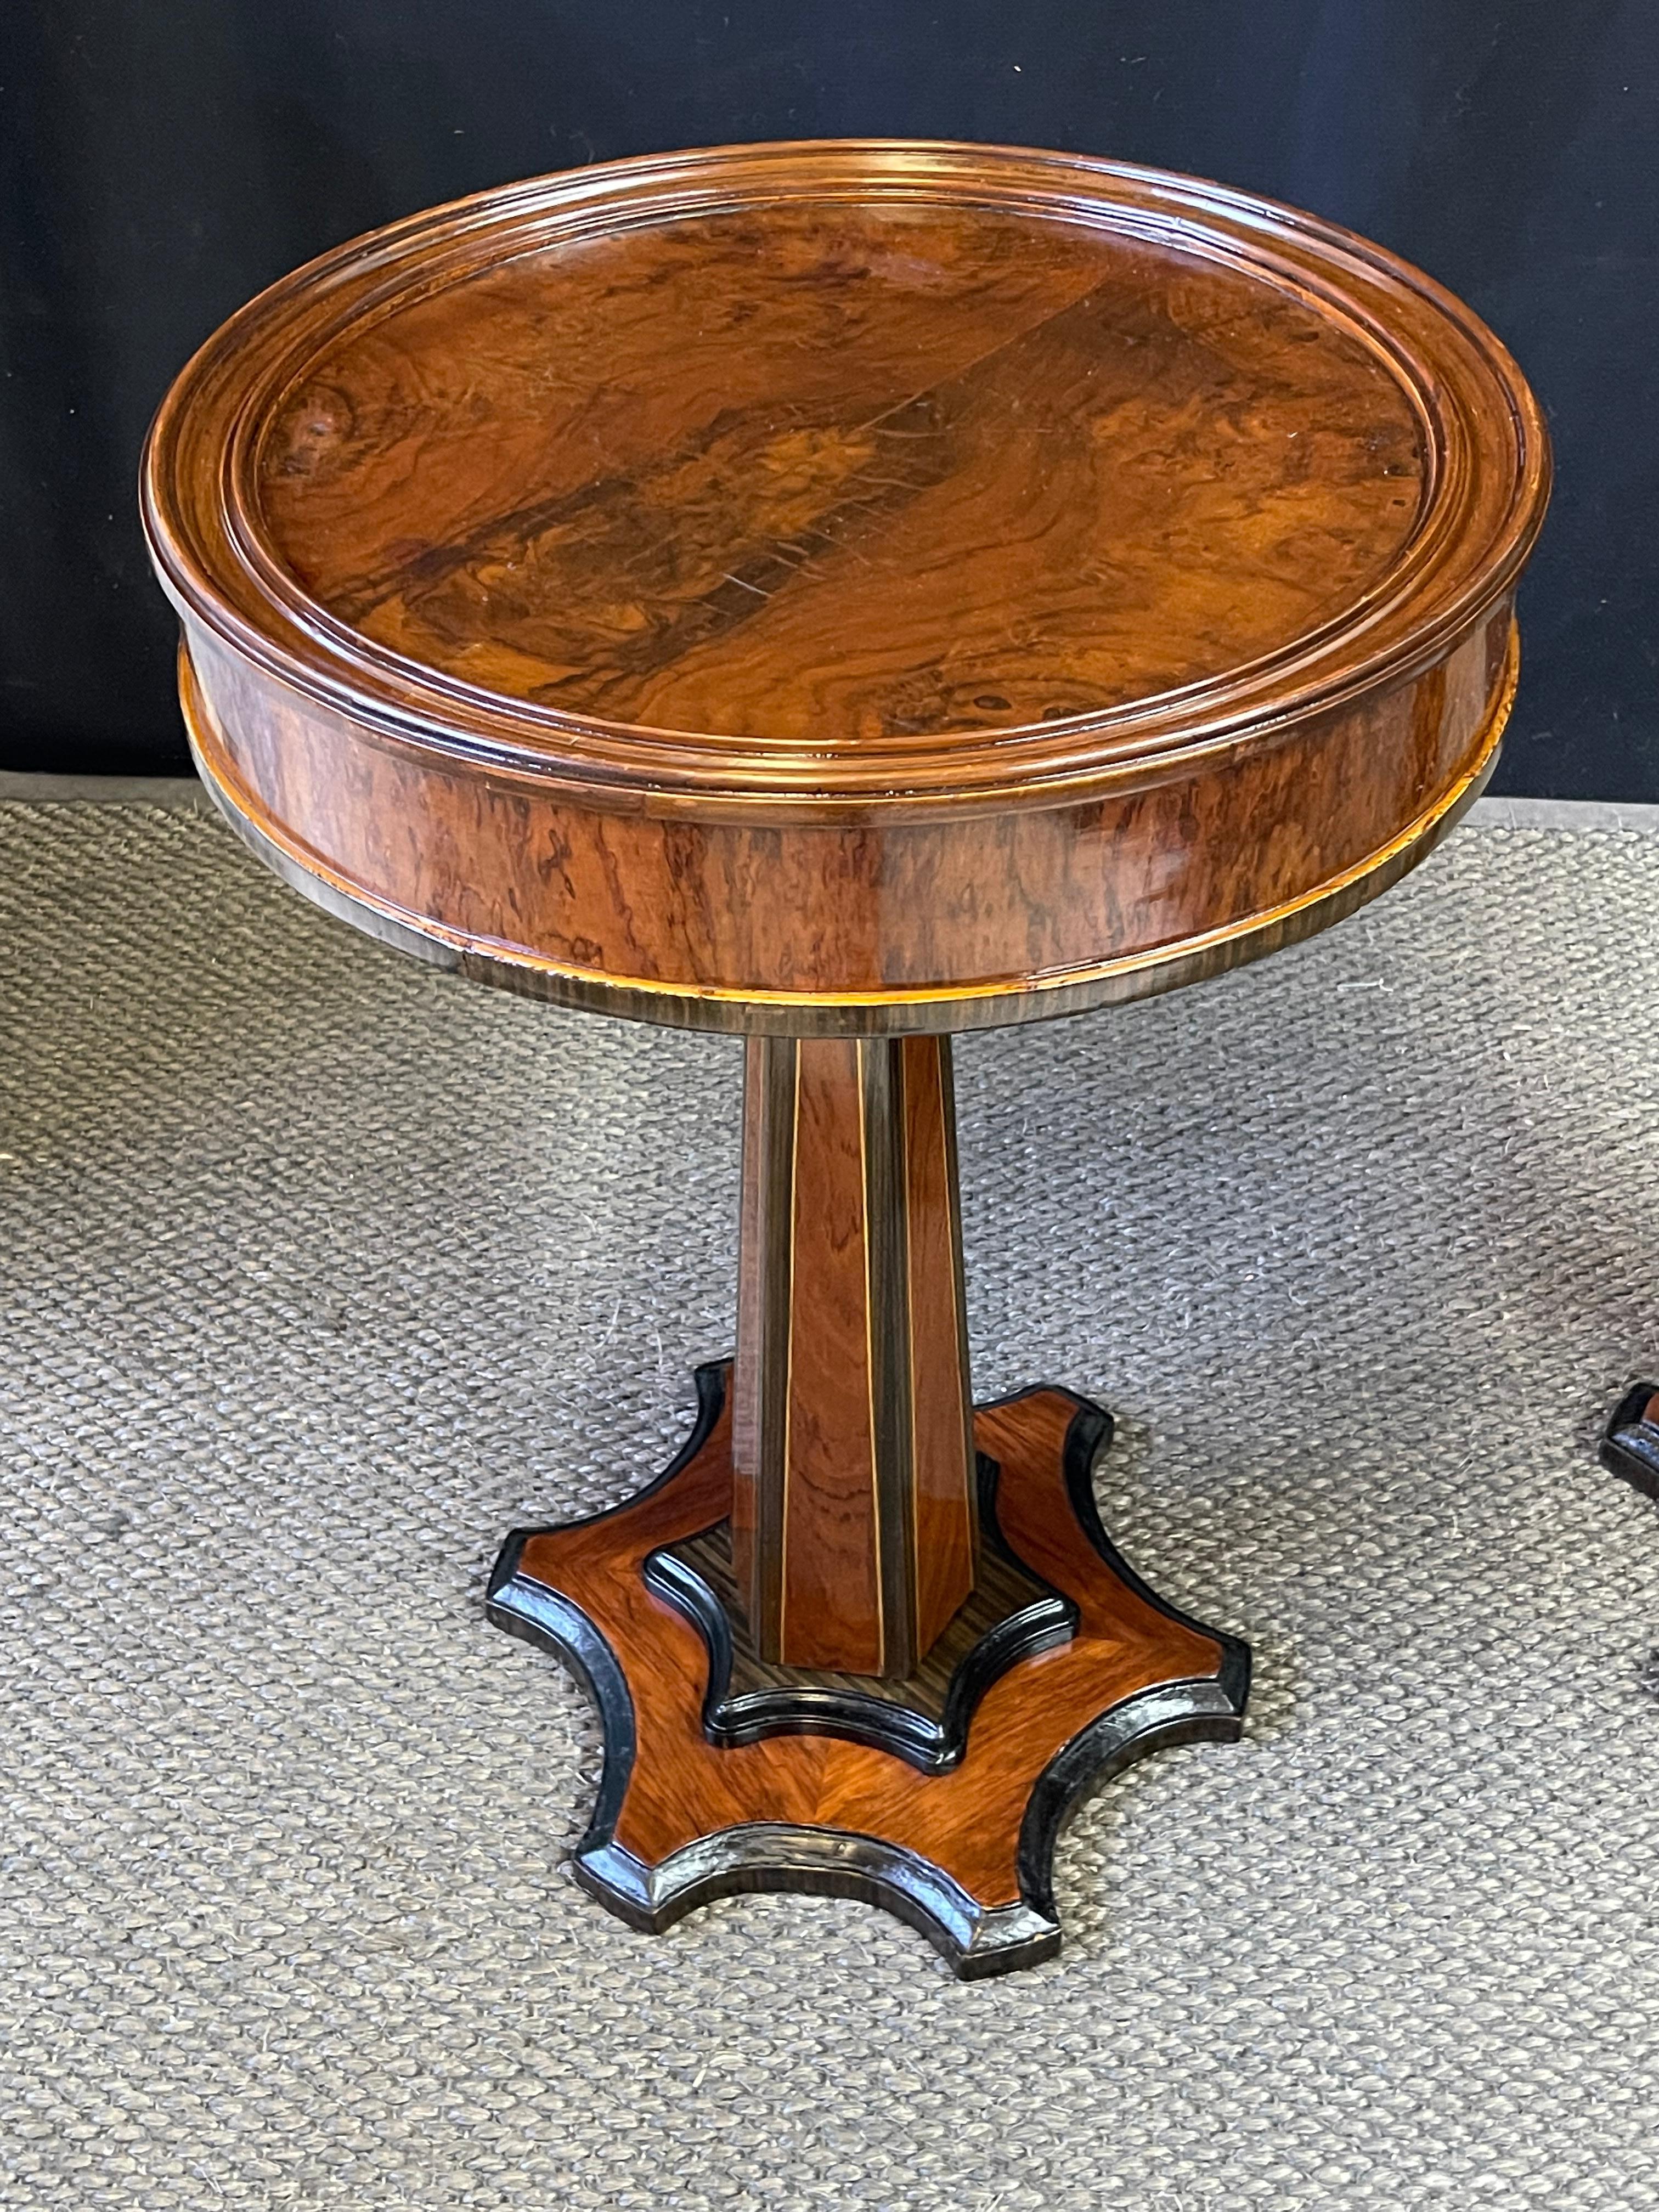 This is a striking pair of early 20th Century French Art Deco gueridon tables rich in burled wood veneers of walnut and palisander with intricate satinwood inlay and ebonized accents. Each circular table top is inset in a molded gallery above a